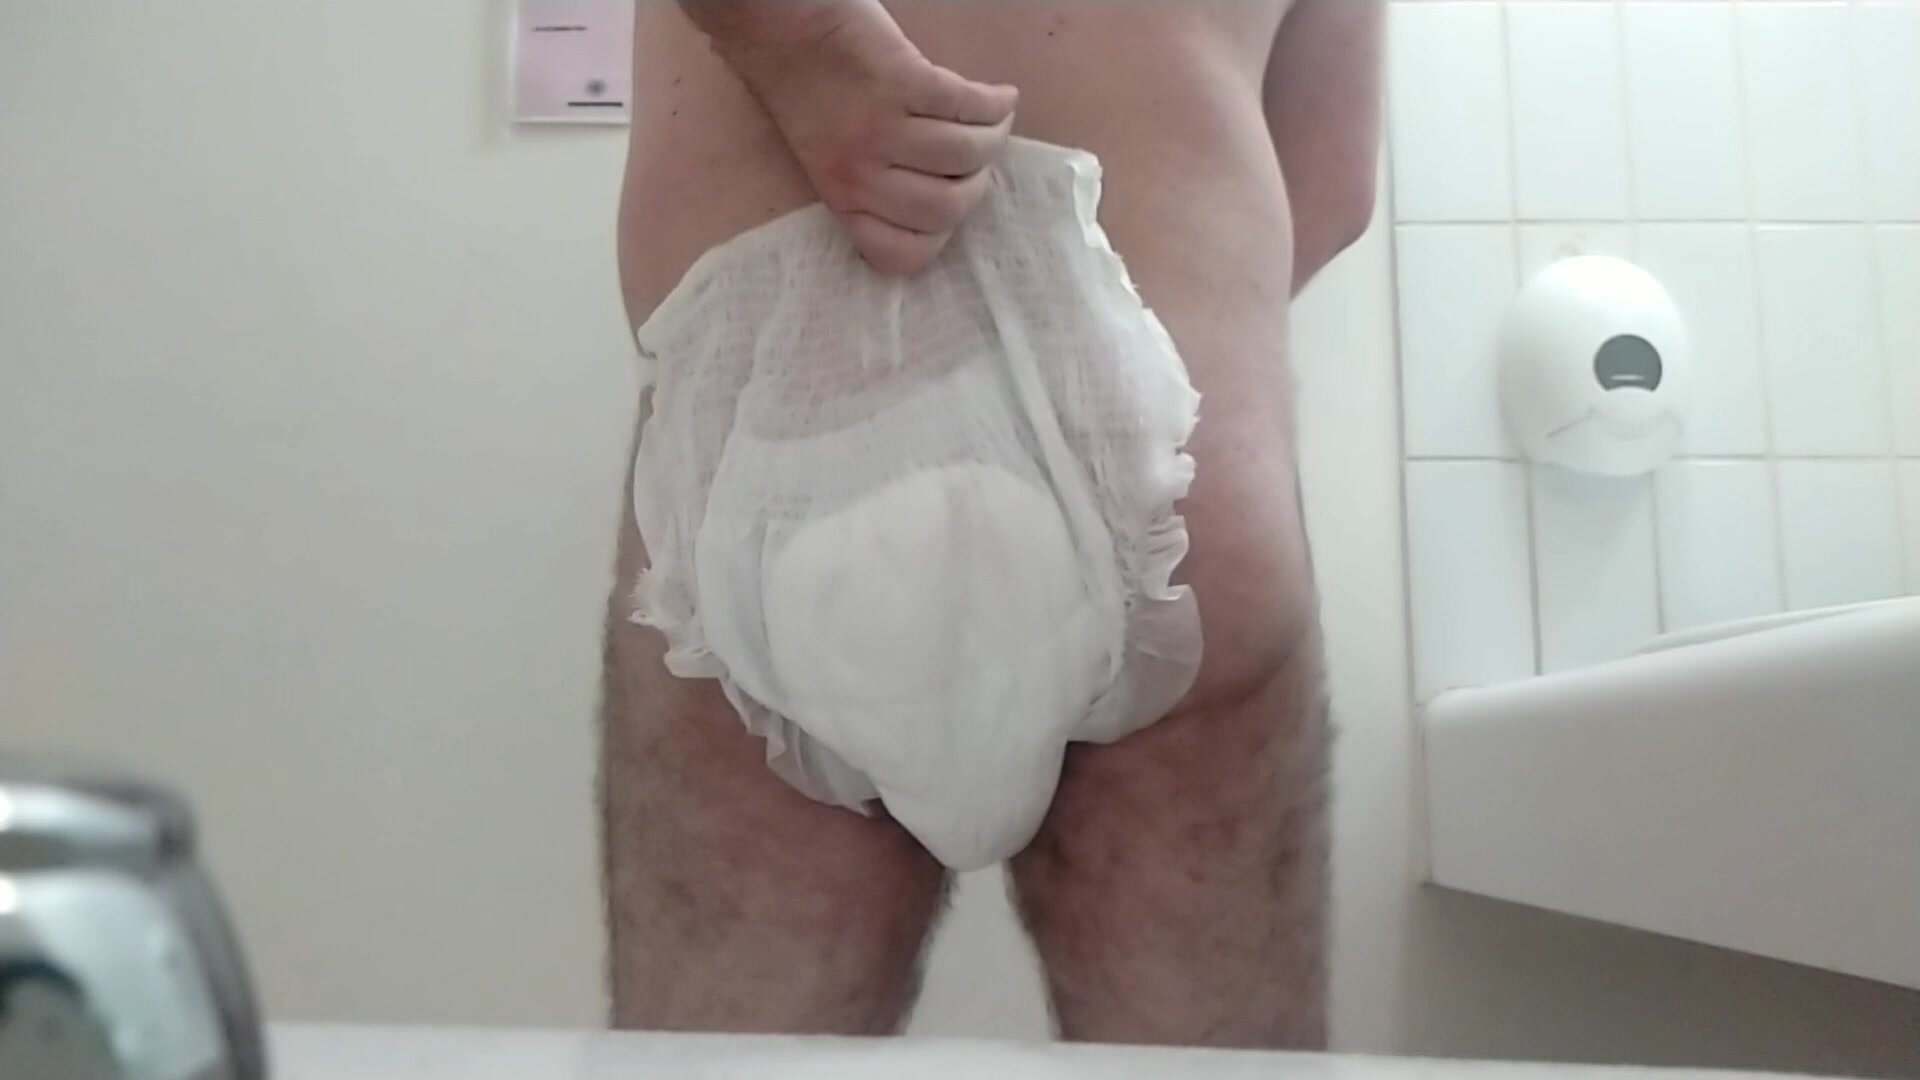 Messy pull up diaper